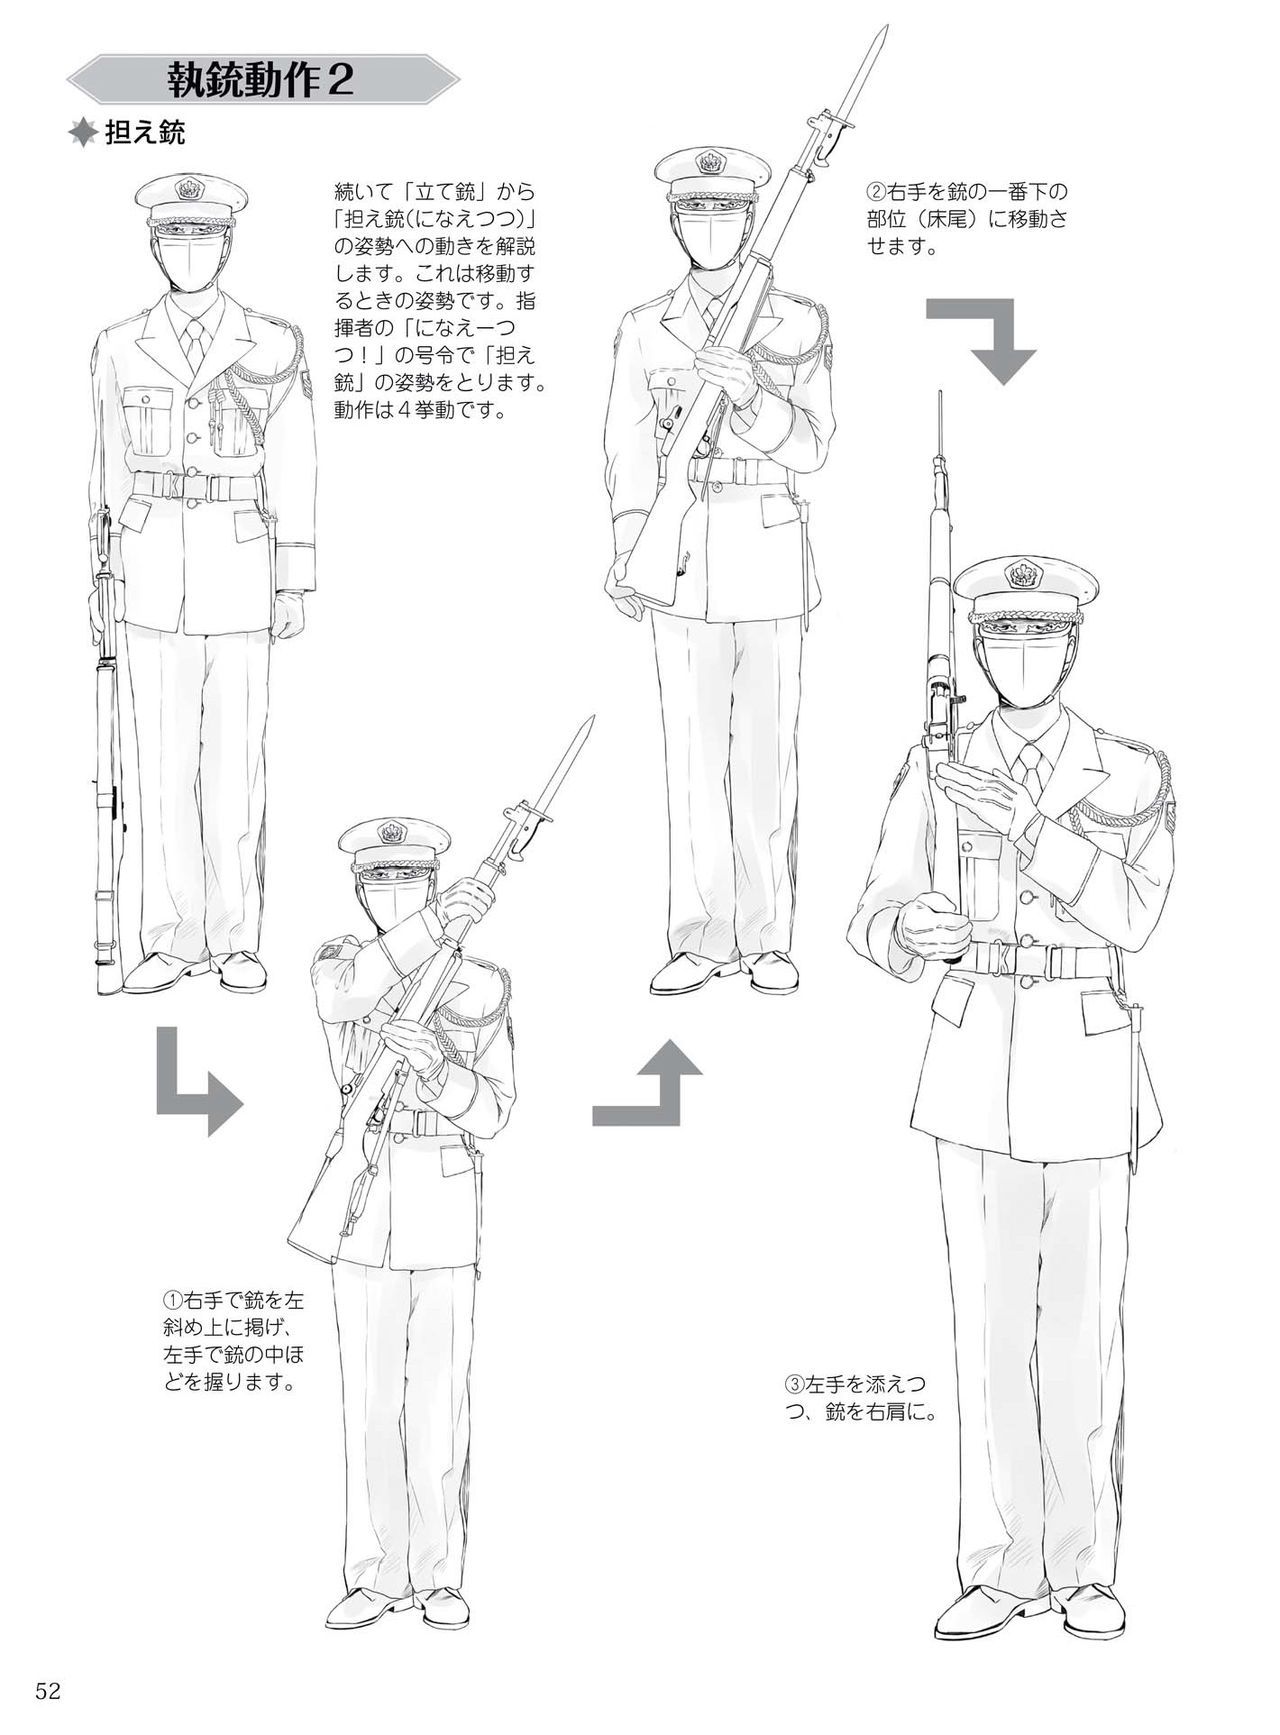 How to draw military uniforms and uniforms From Self-Defense Forces 軍服・制服の描き方 アメリカ軍・自衛隊の制服から戦闘服まで 55